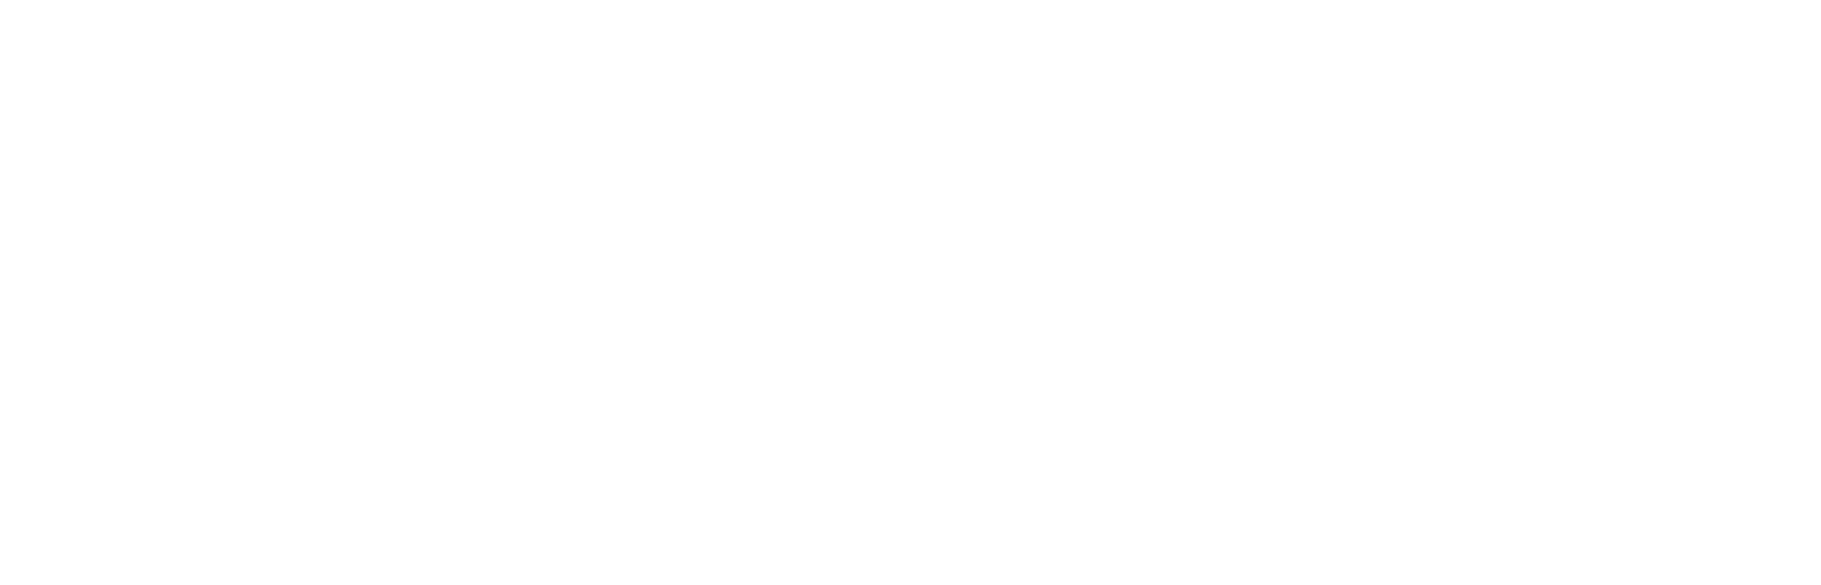 Bates Technology IT Managed Services